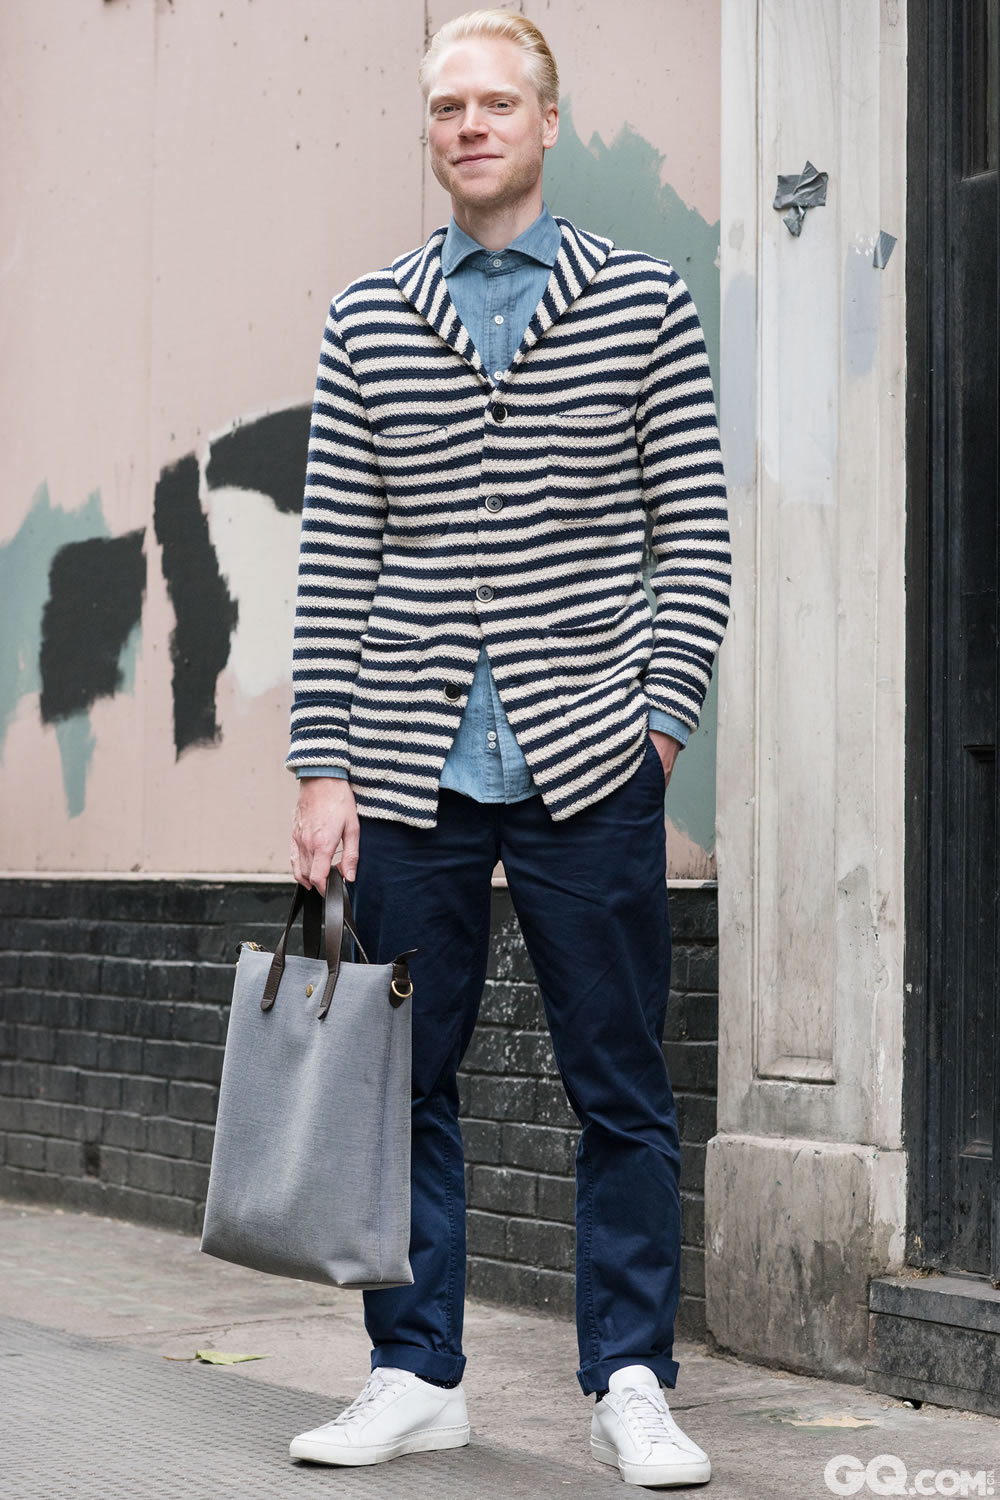 Sam
Jacket: Borino
T-shirt: Drakes
Trousers: Acne
Shoes:	Common Projects 
Bag: Mismo 

Inspiration: Today was a mix of different shades of blues
(今天就是让深浅不一的蓝色混搭起来)